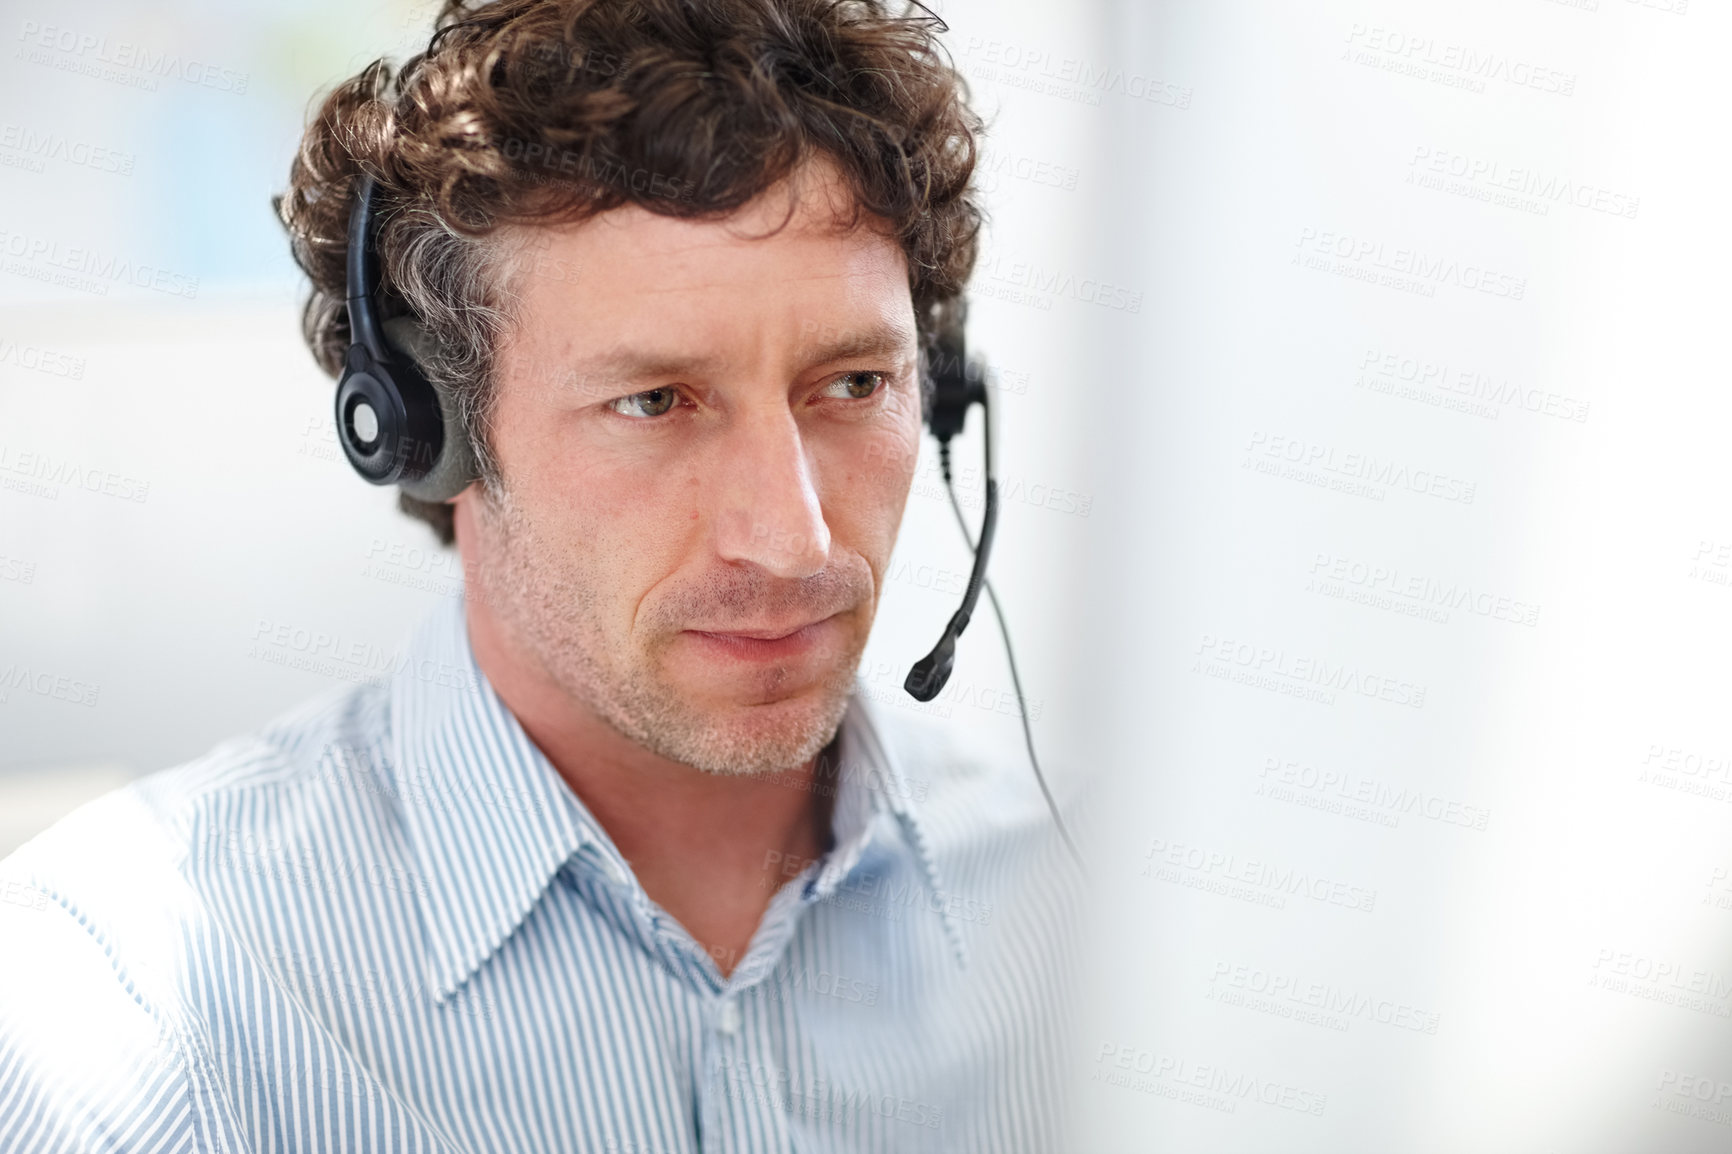 Buy stock photo Cropped shot of a handsome call center operator in the office